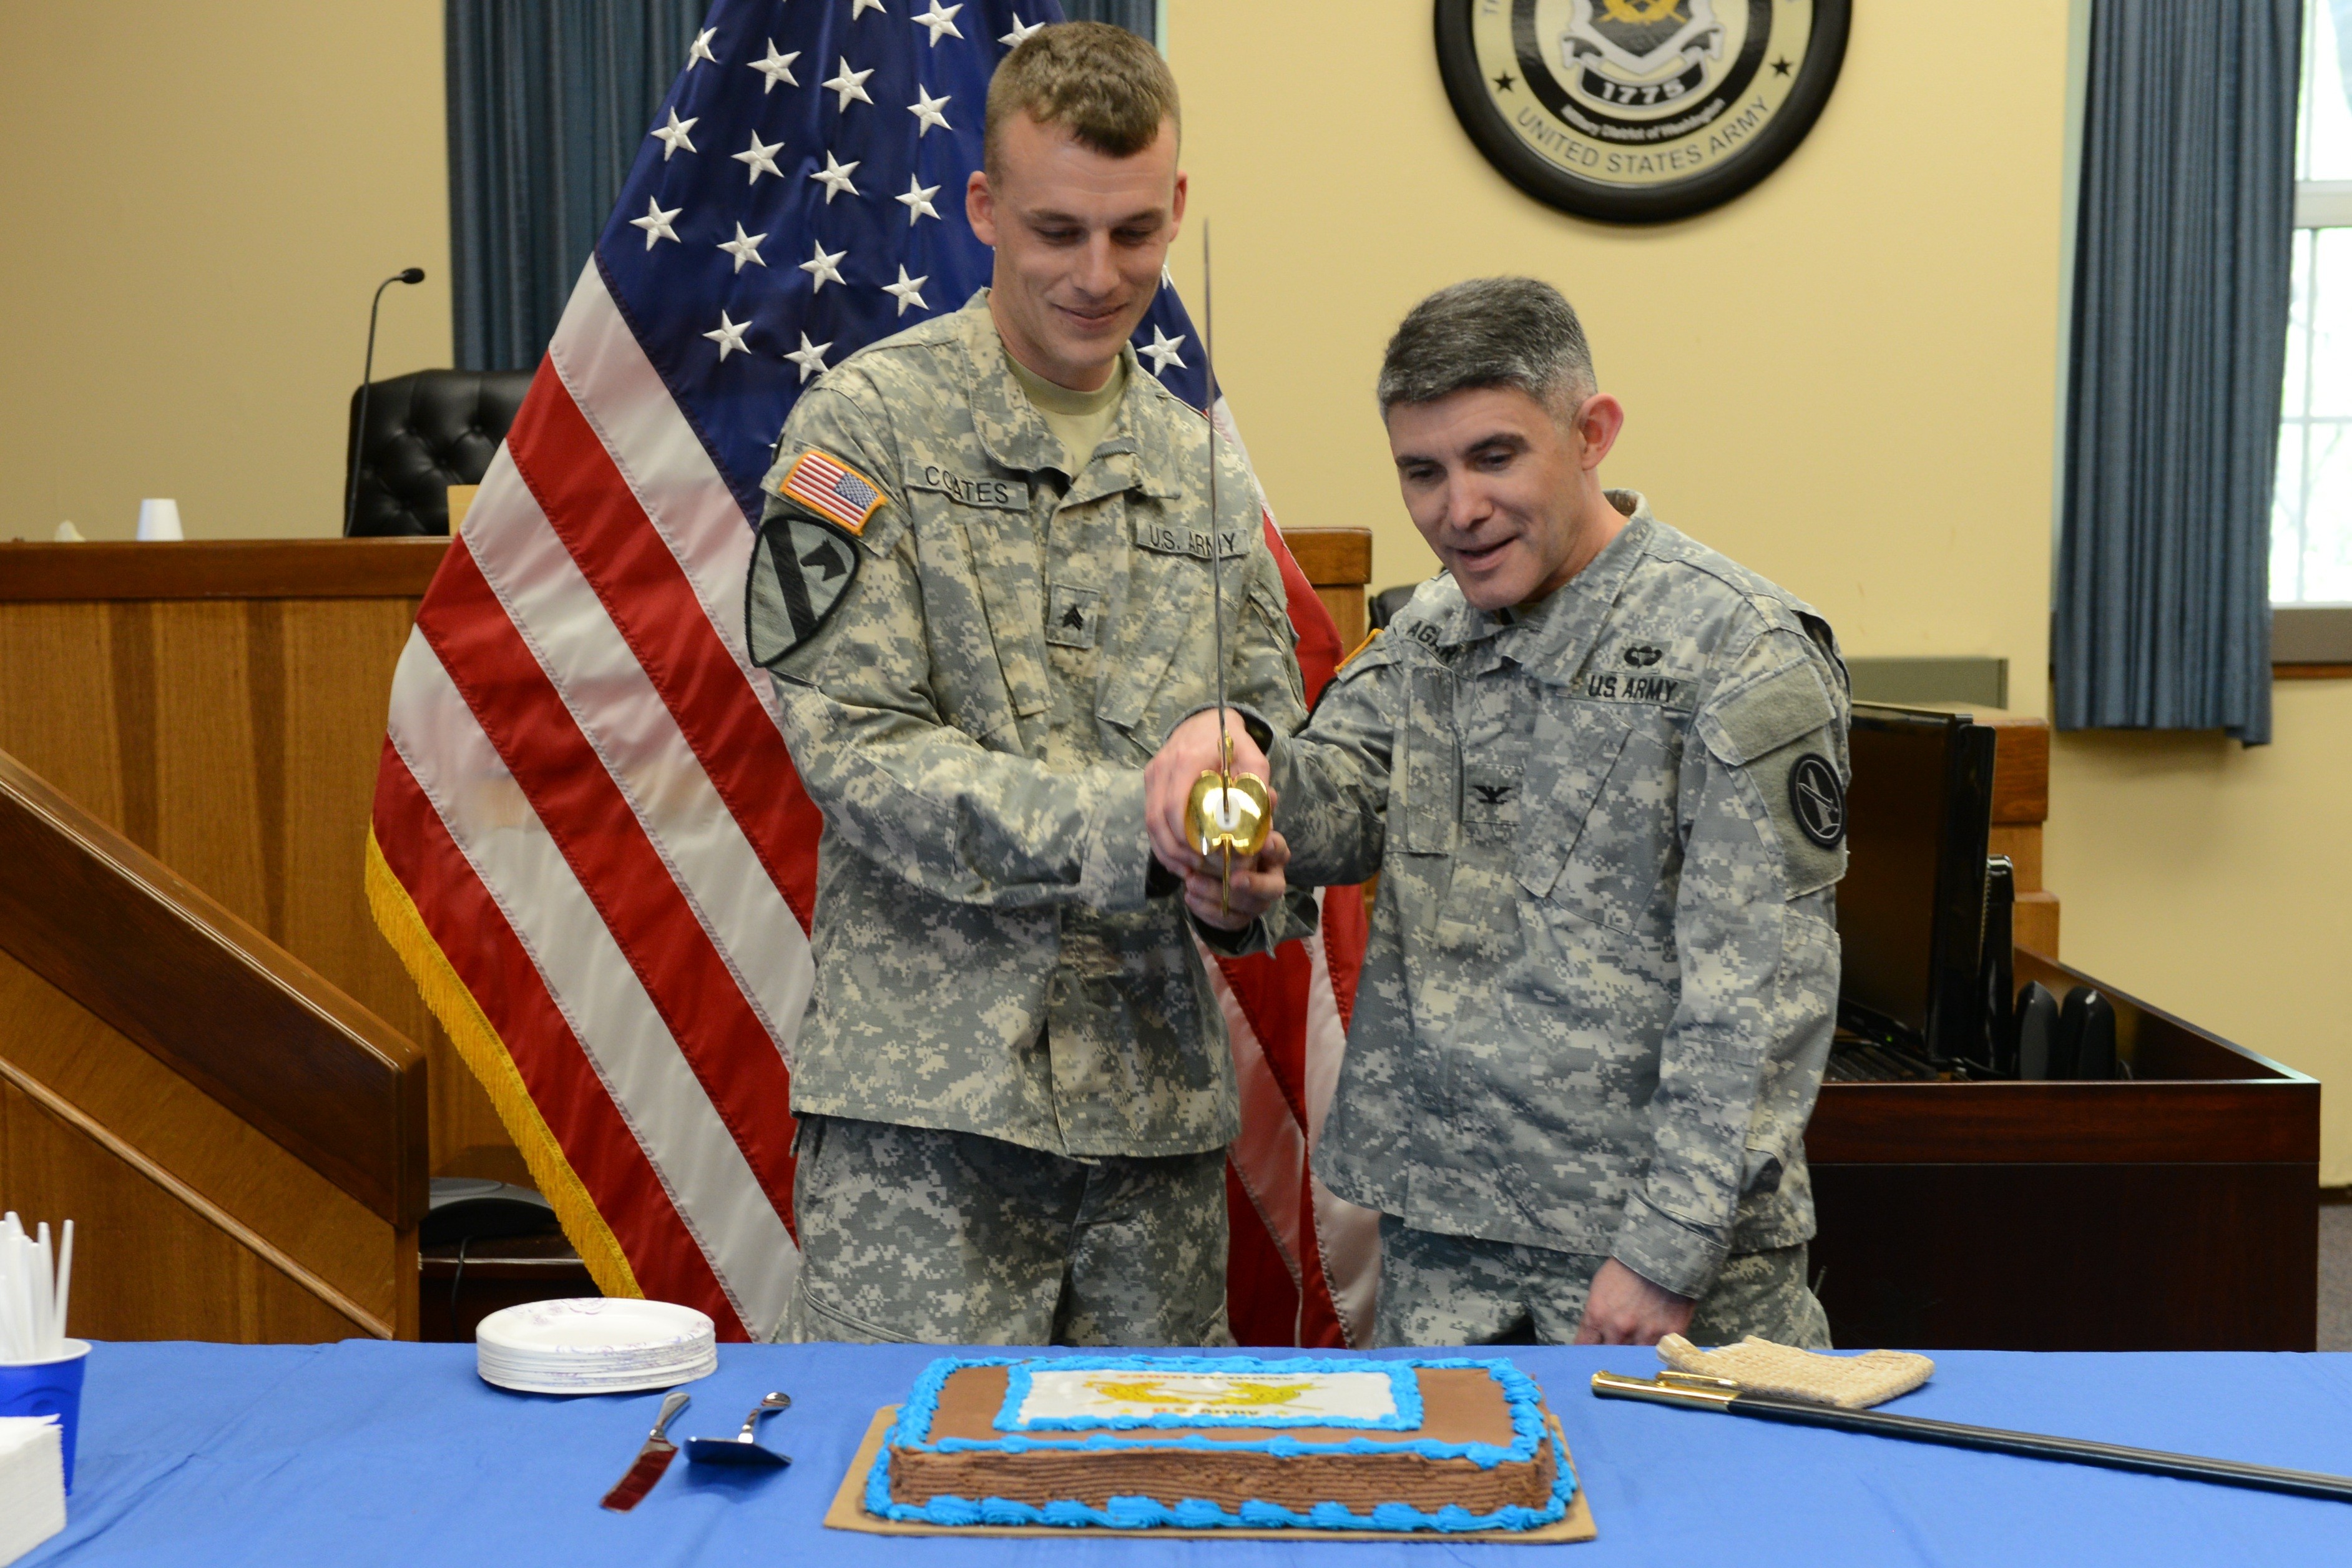 Happy 239th Birthday JAG Corps Article The United States Army